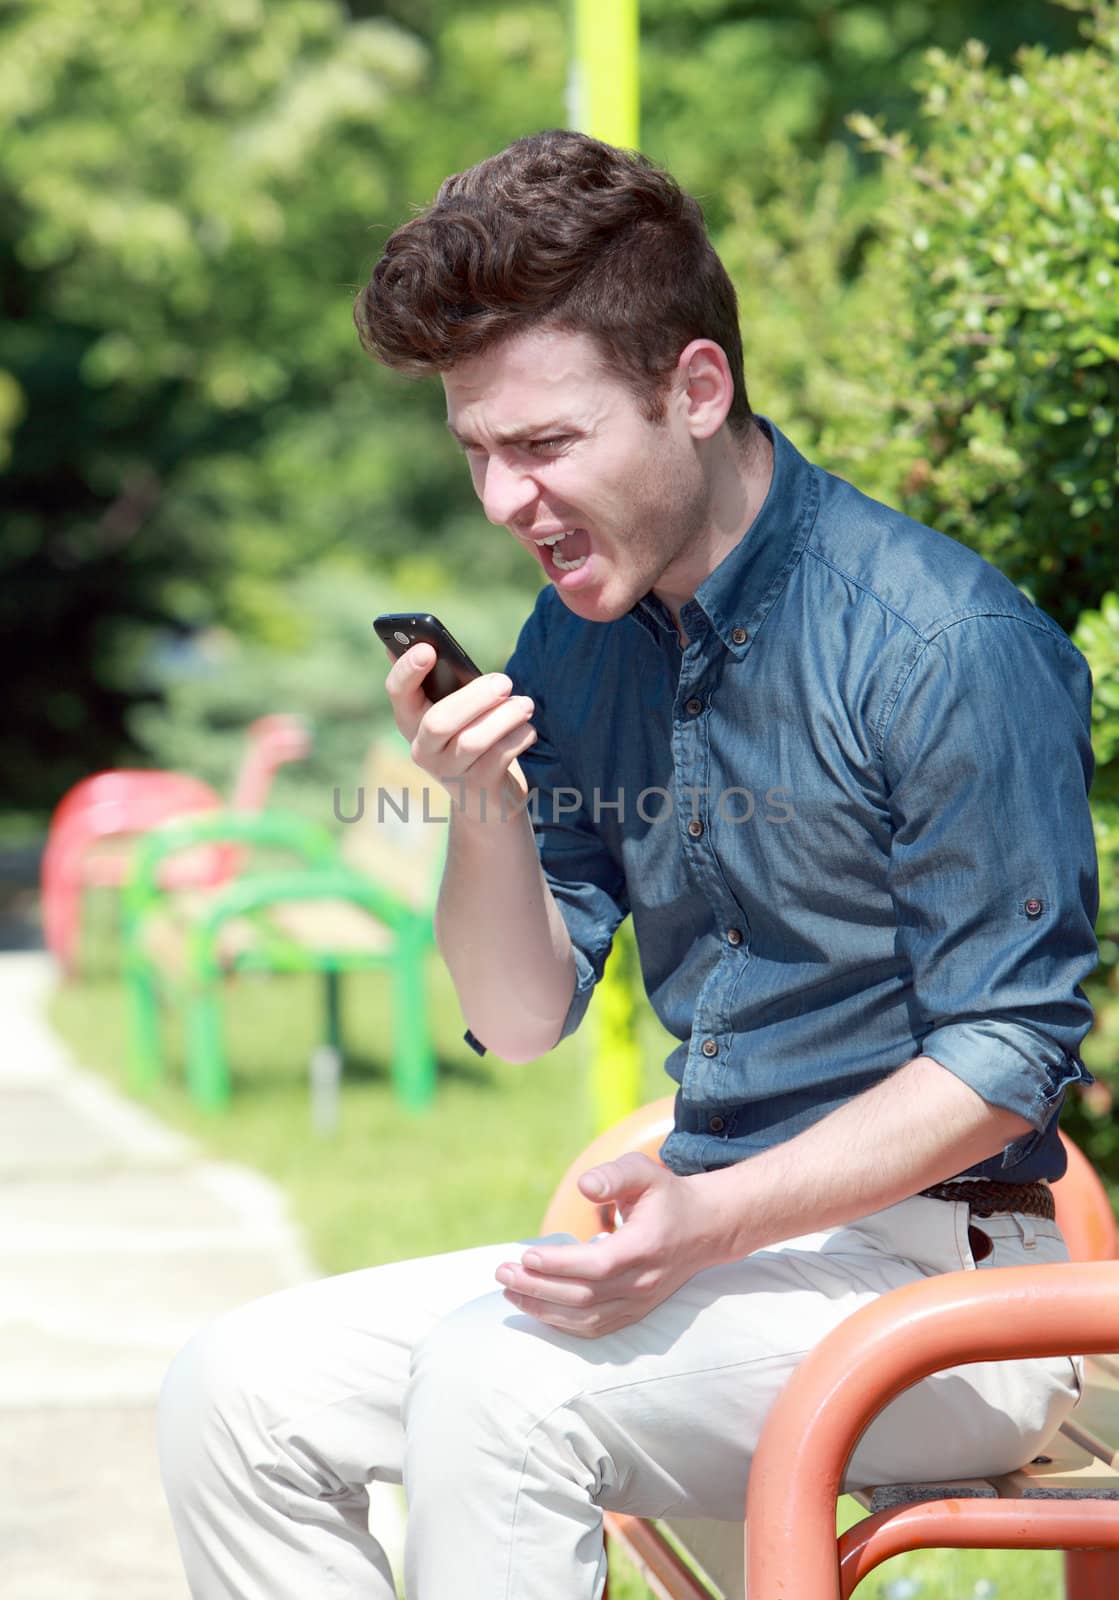 Young man shouting on telephone in the park by shamtor